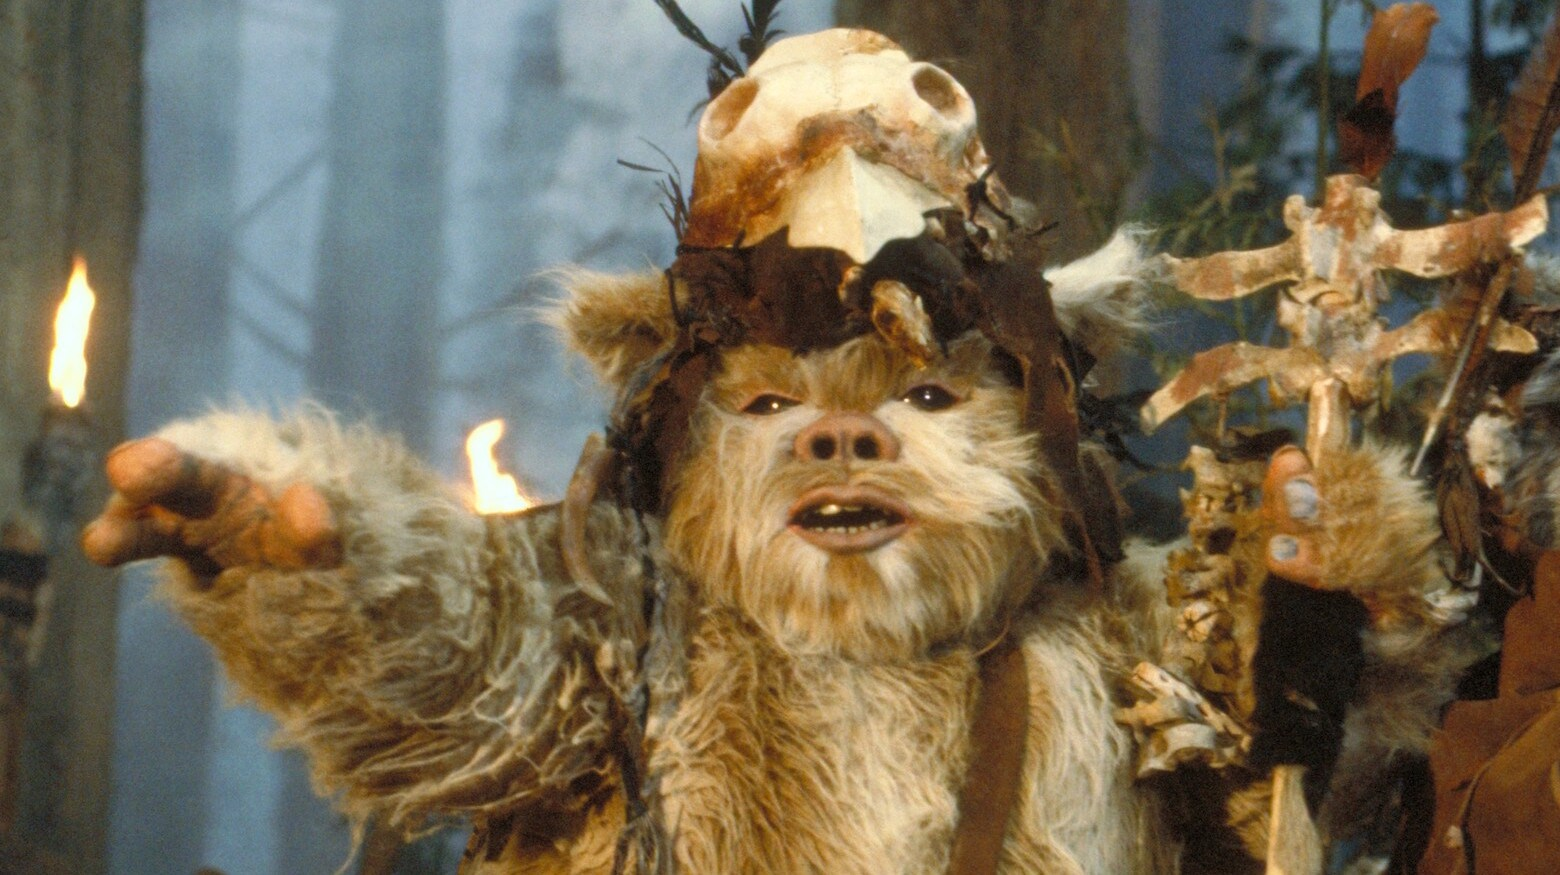 A Logray Ewok has its arm in front of it.